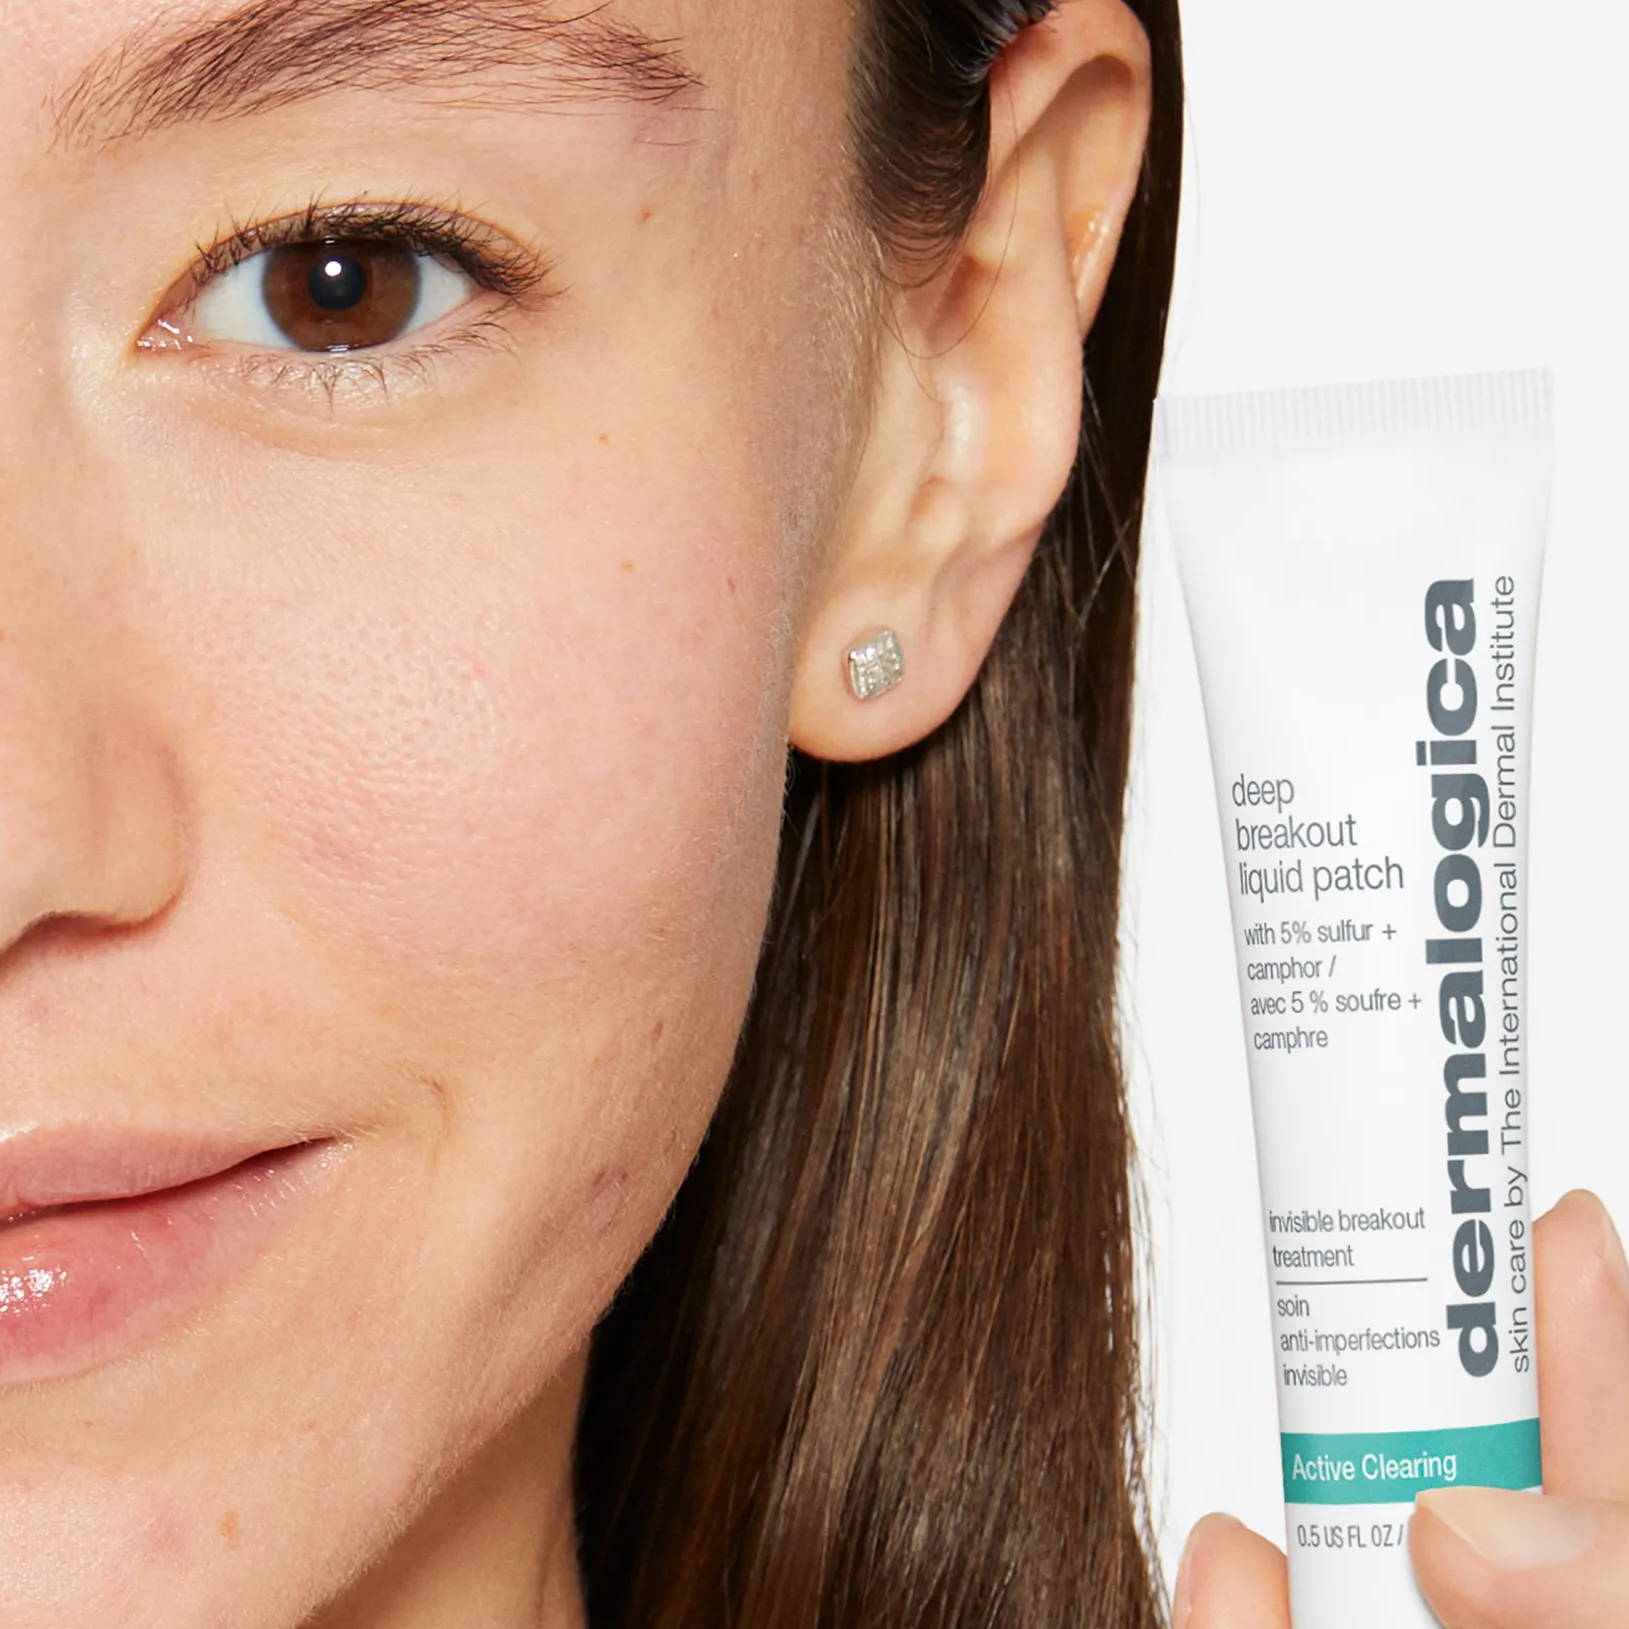 Model holding the New Dermalogica Deep Breakout Liquid Patch